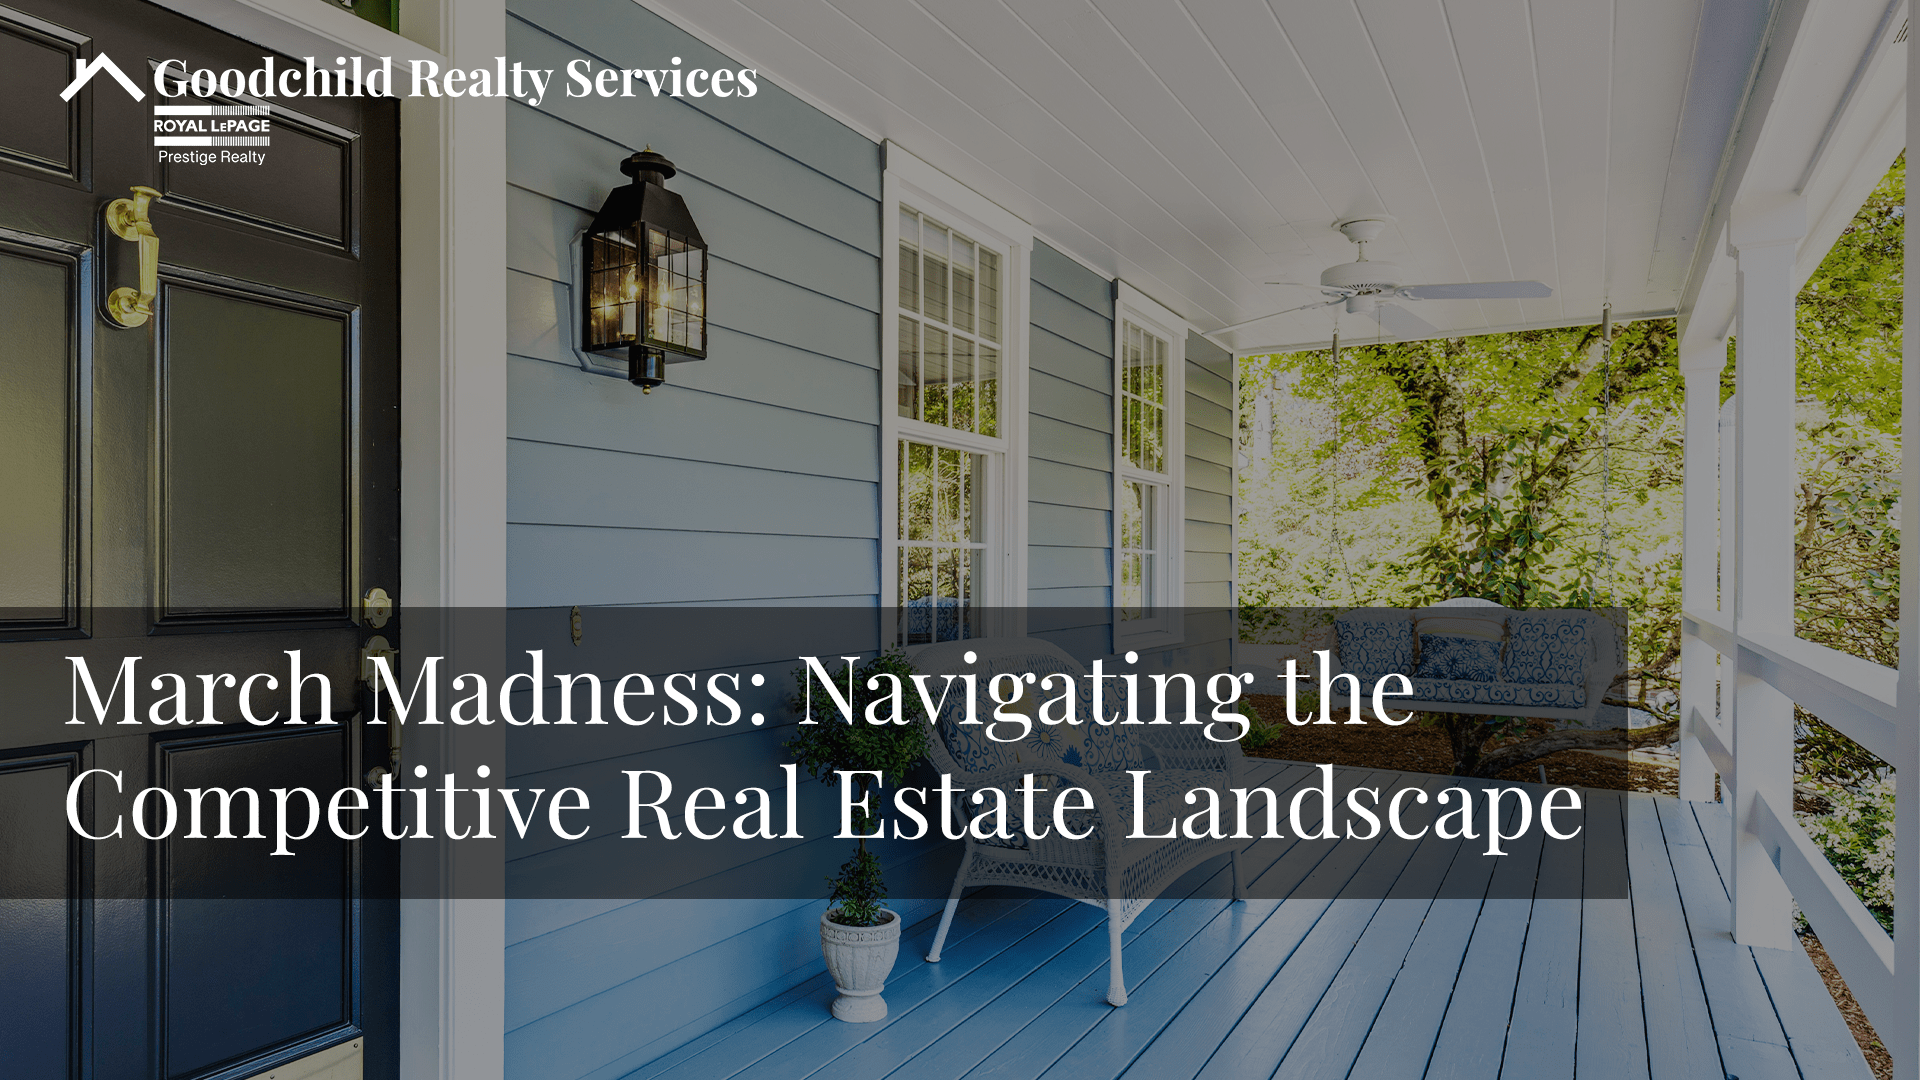 March Madness: Navigating the Competitive Real Estate Landscape